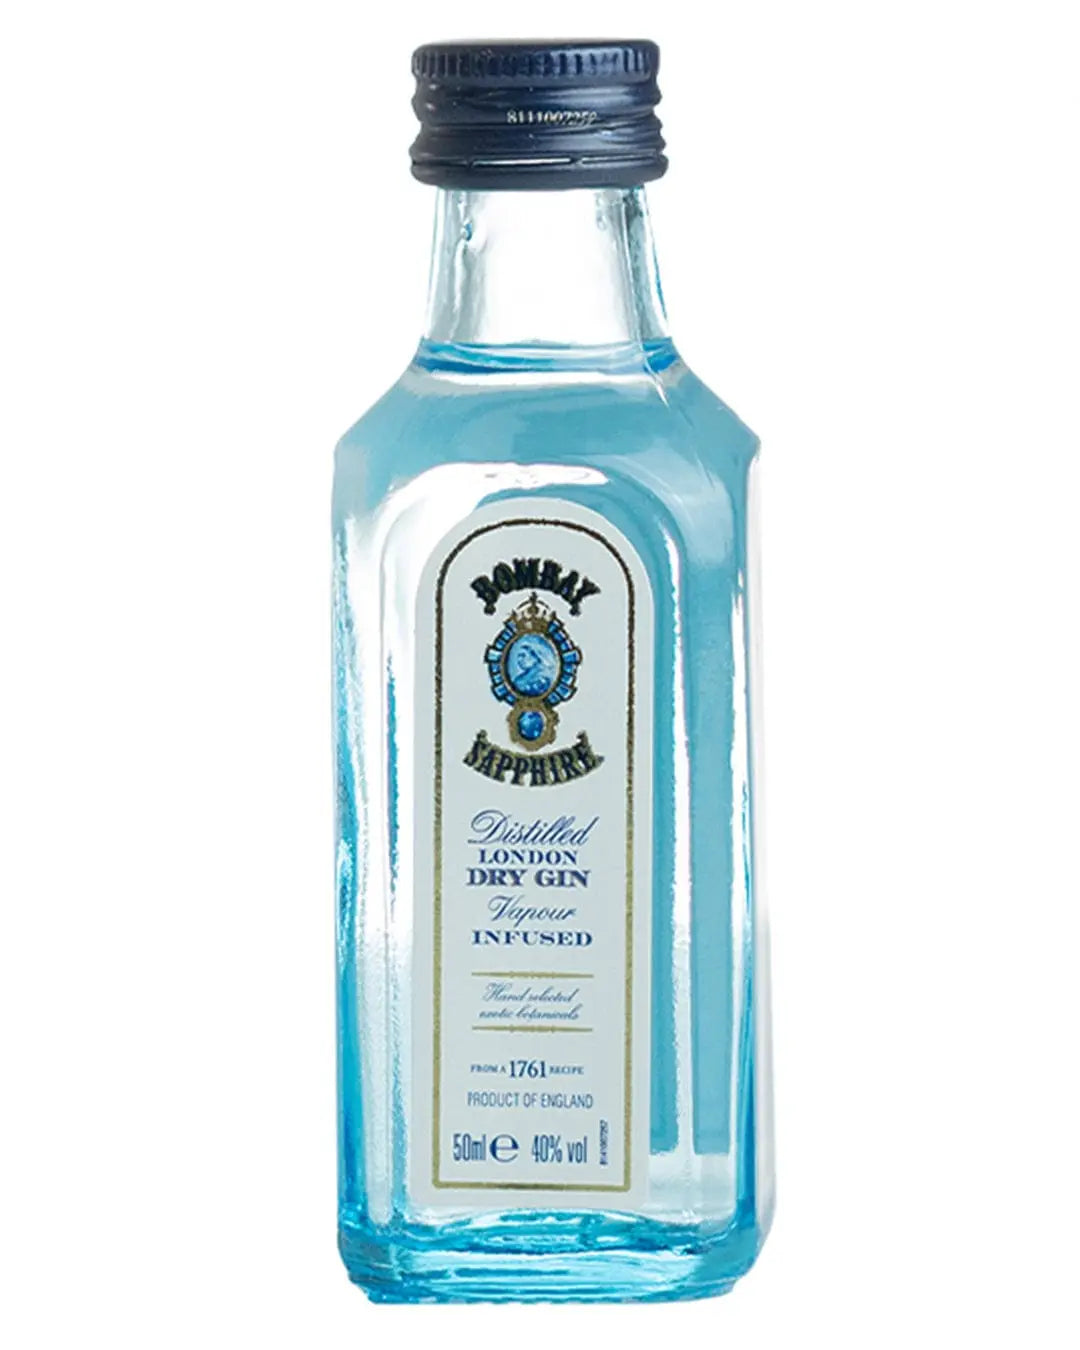 5 Miniature, – The cl Gin Club Bottle Sapphire Bombay